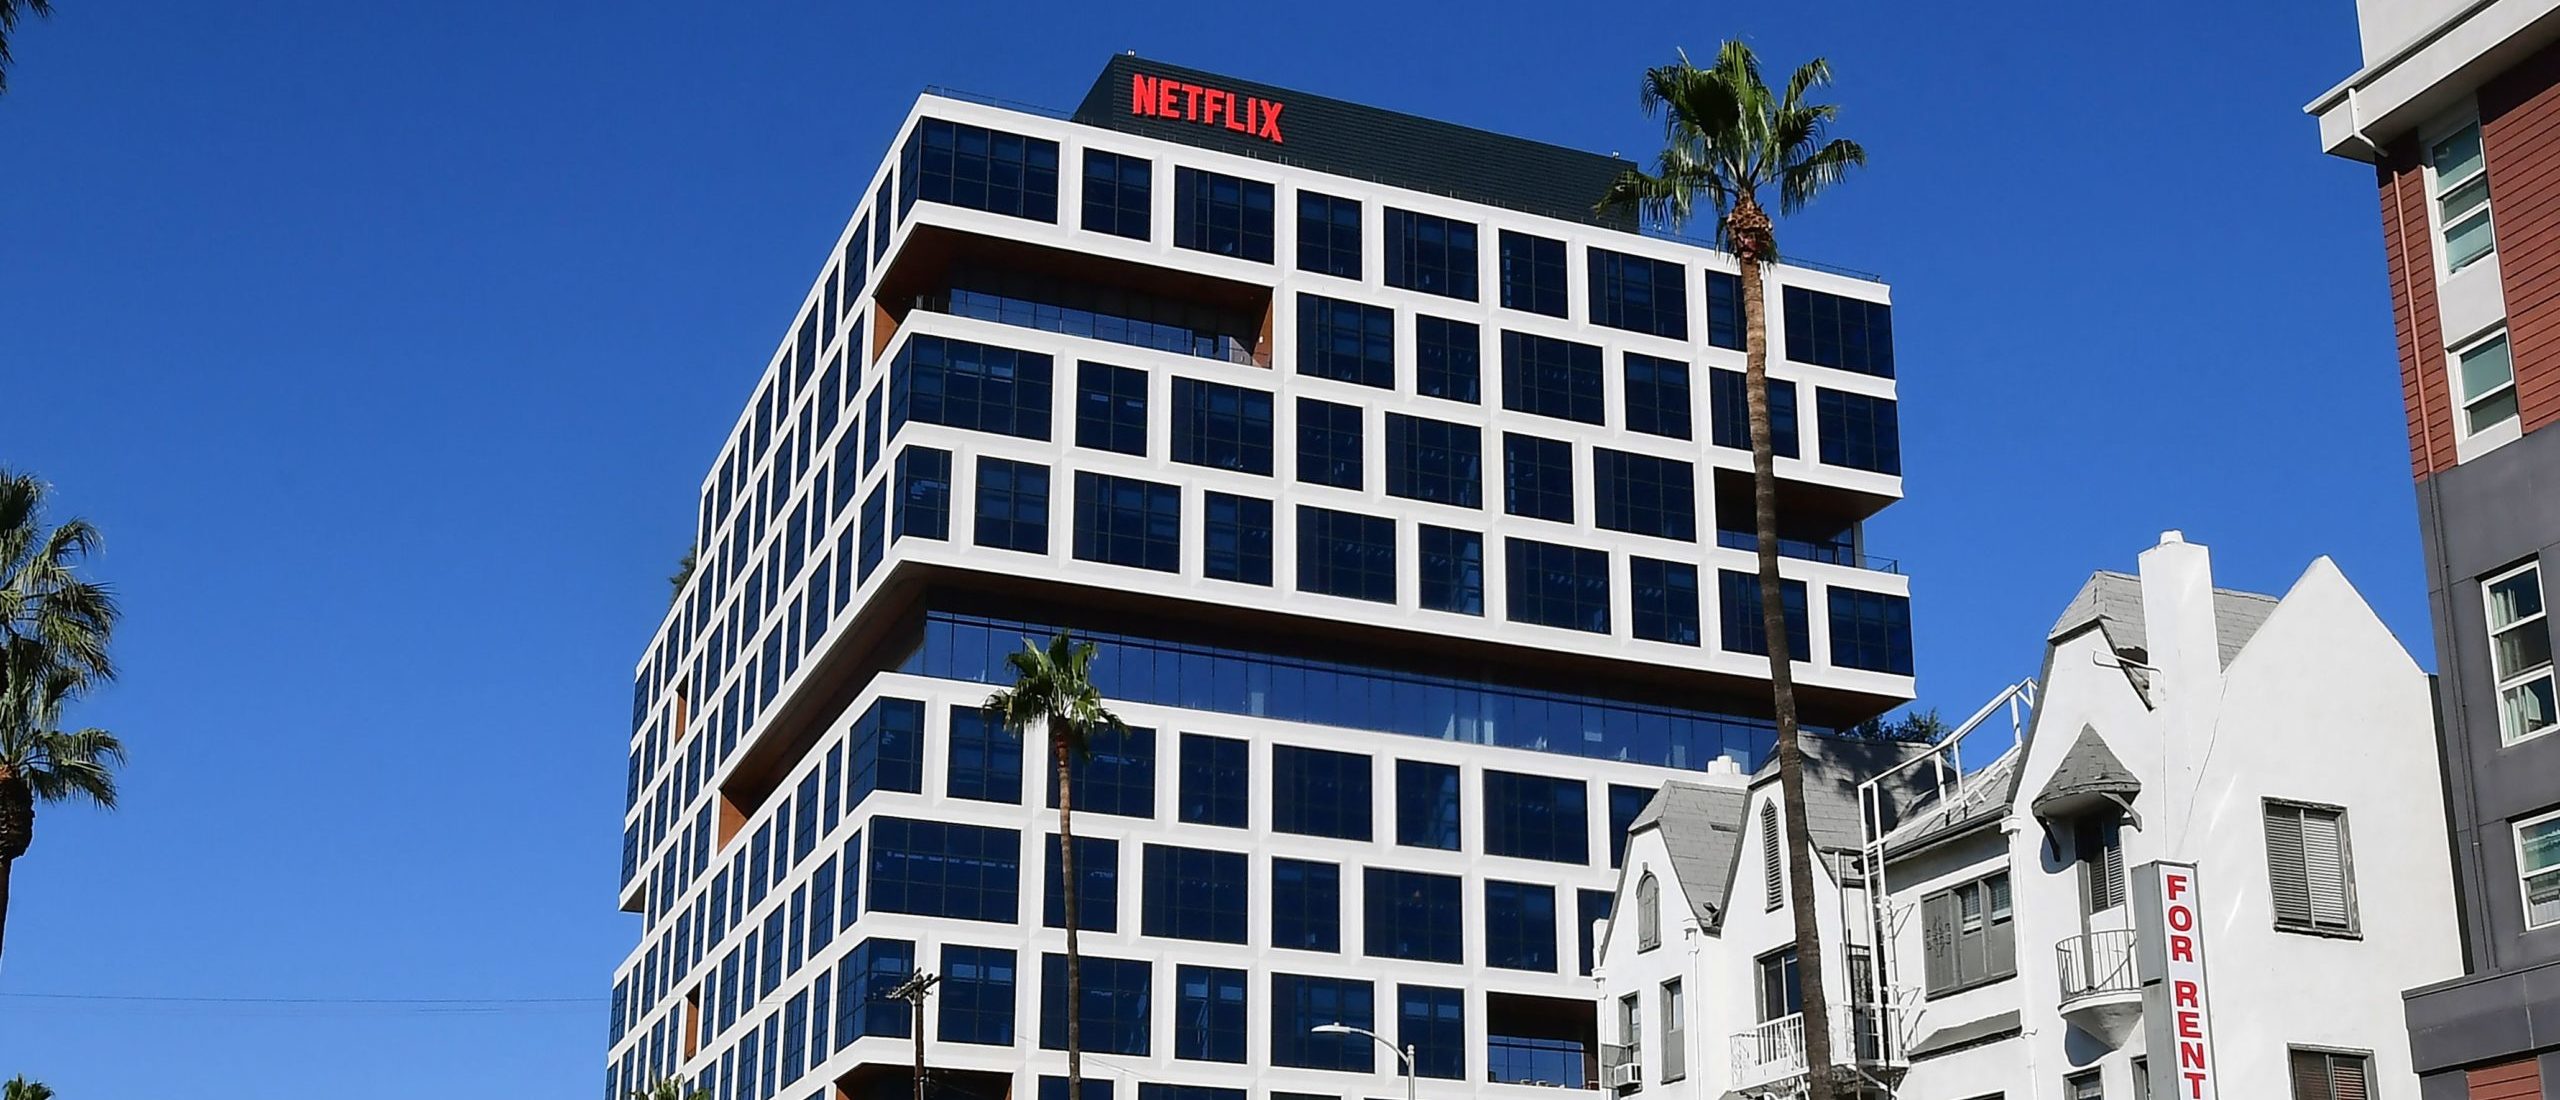 The Netflix building on Sunset Boulevard is pictured where a rally in support of the Netflix transgender walkout was due to begin but eventually moved to a different location on October 20, 2021 in Los Angeles, California . - Netflix bosses braced for an employee walkout and rally in Los Angeles on October 20, 2021 as anger swelled over a new Dave Chappelle comedy special that activists say is harmful to the transgender community. (Photo by Frederic J. BROWN / AFP) (Photo by FREDERIC J. BROWN/AFP via Getty Images)